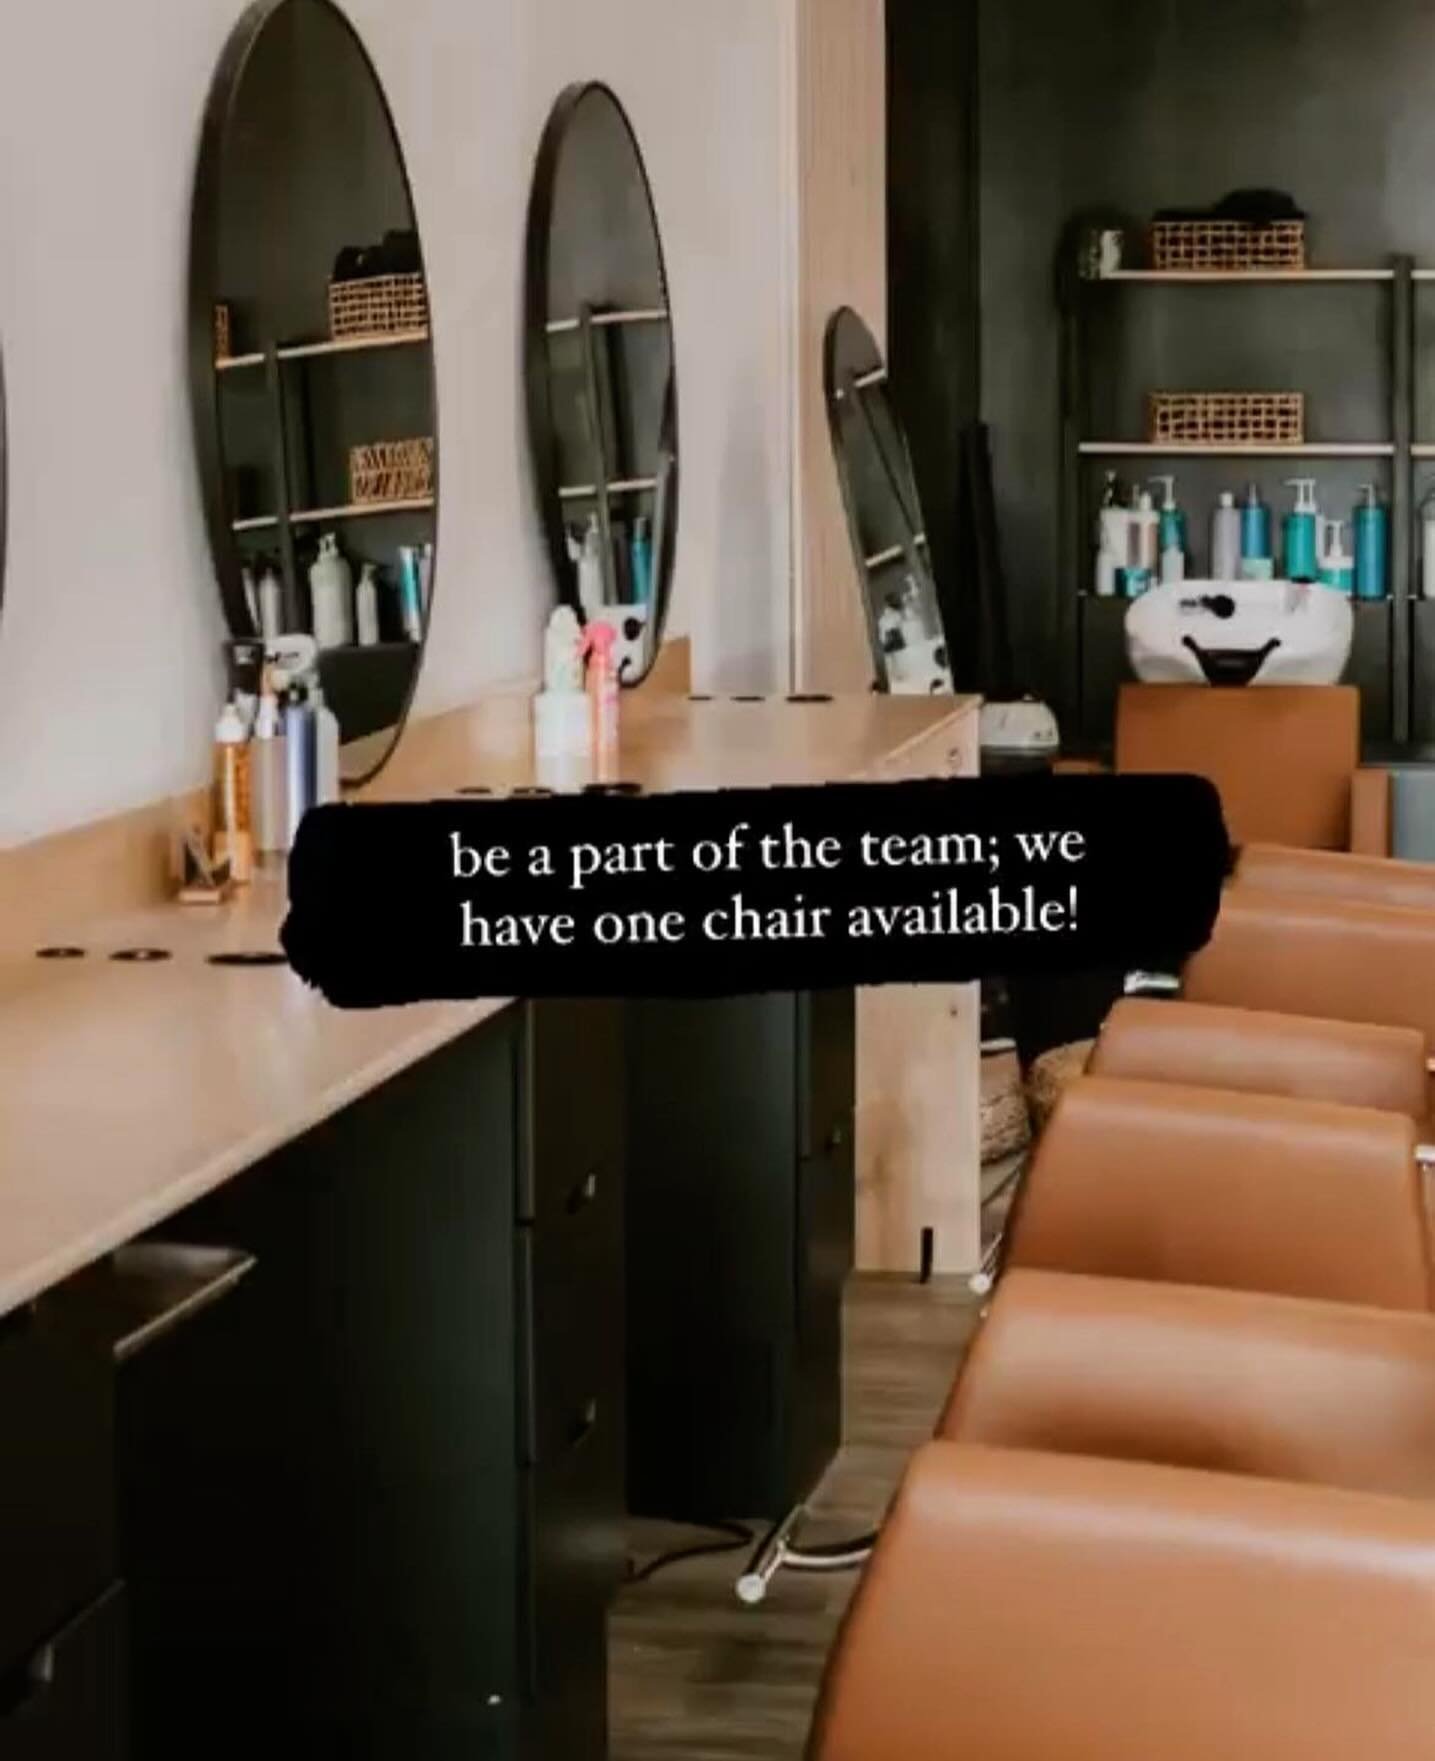 want to take that next step in your career? 
booth renting is just that! ✨

Here at Wave, you have freedom to be your own business/boss, create your own schedule, choose the services you&rsquo;d like to perform, all while working in a team environmen